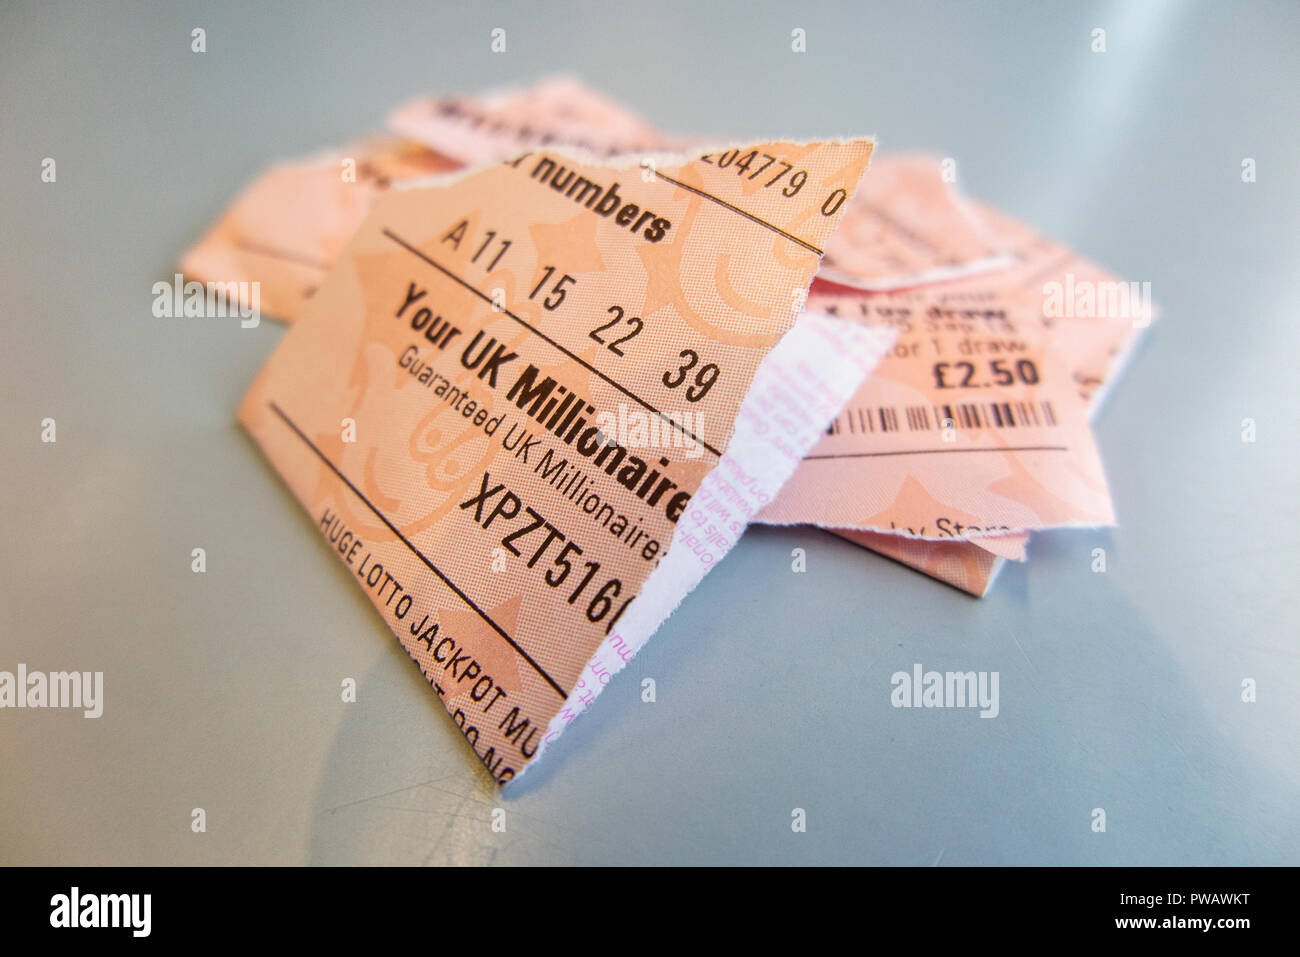 A torn up lottery ticket, shredded into many pieces Stock Photo